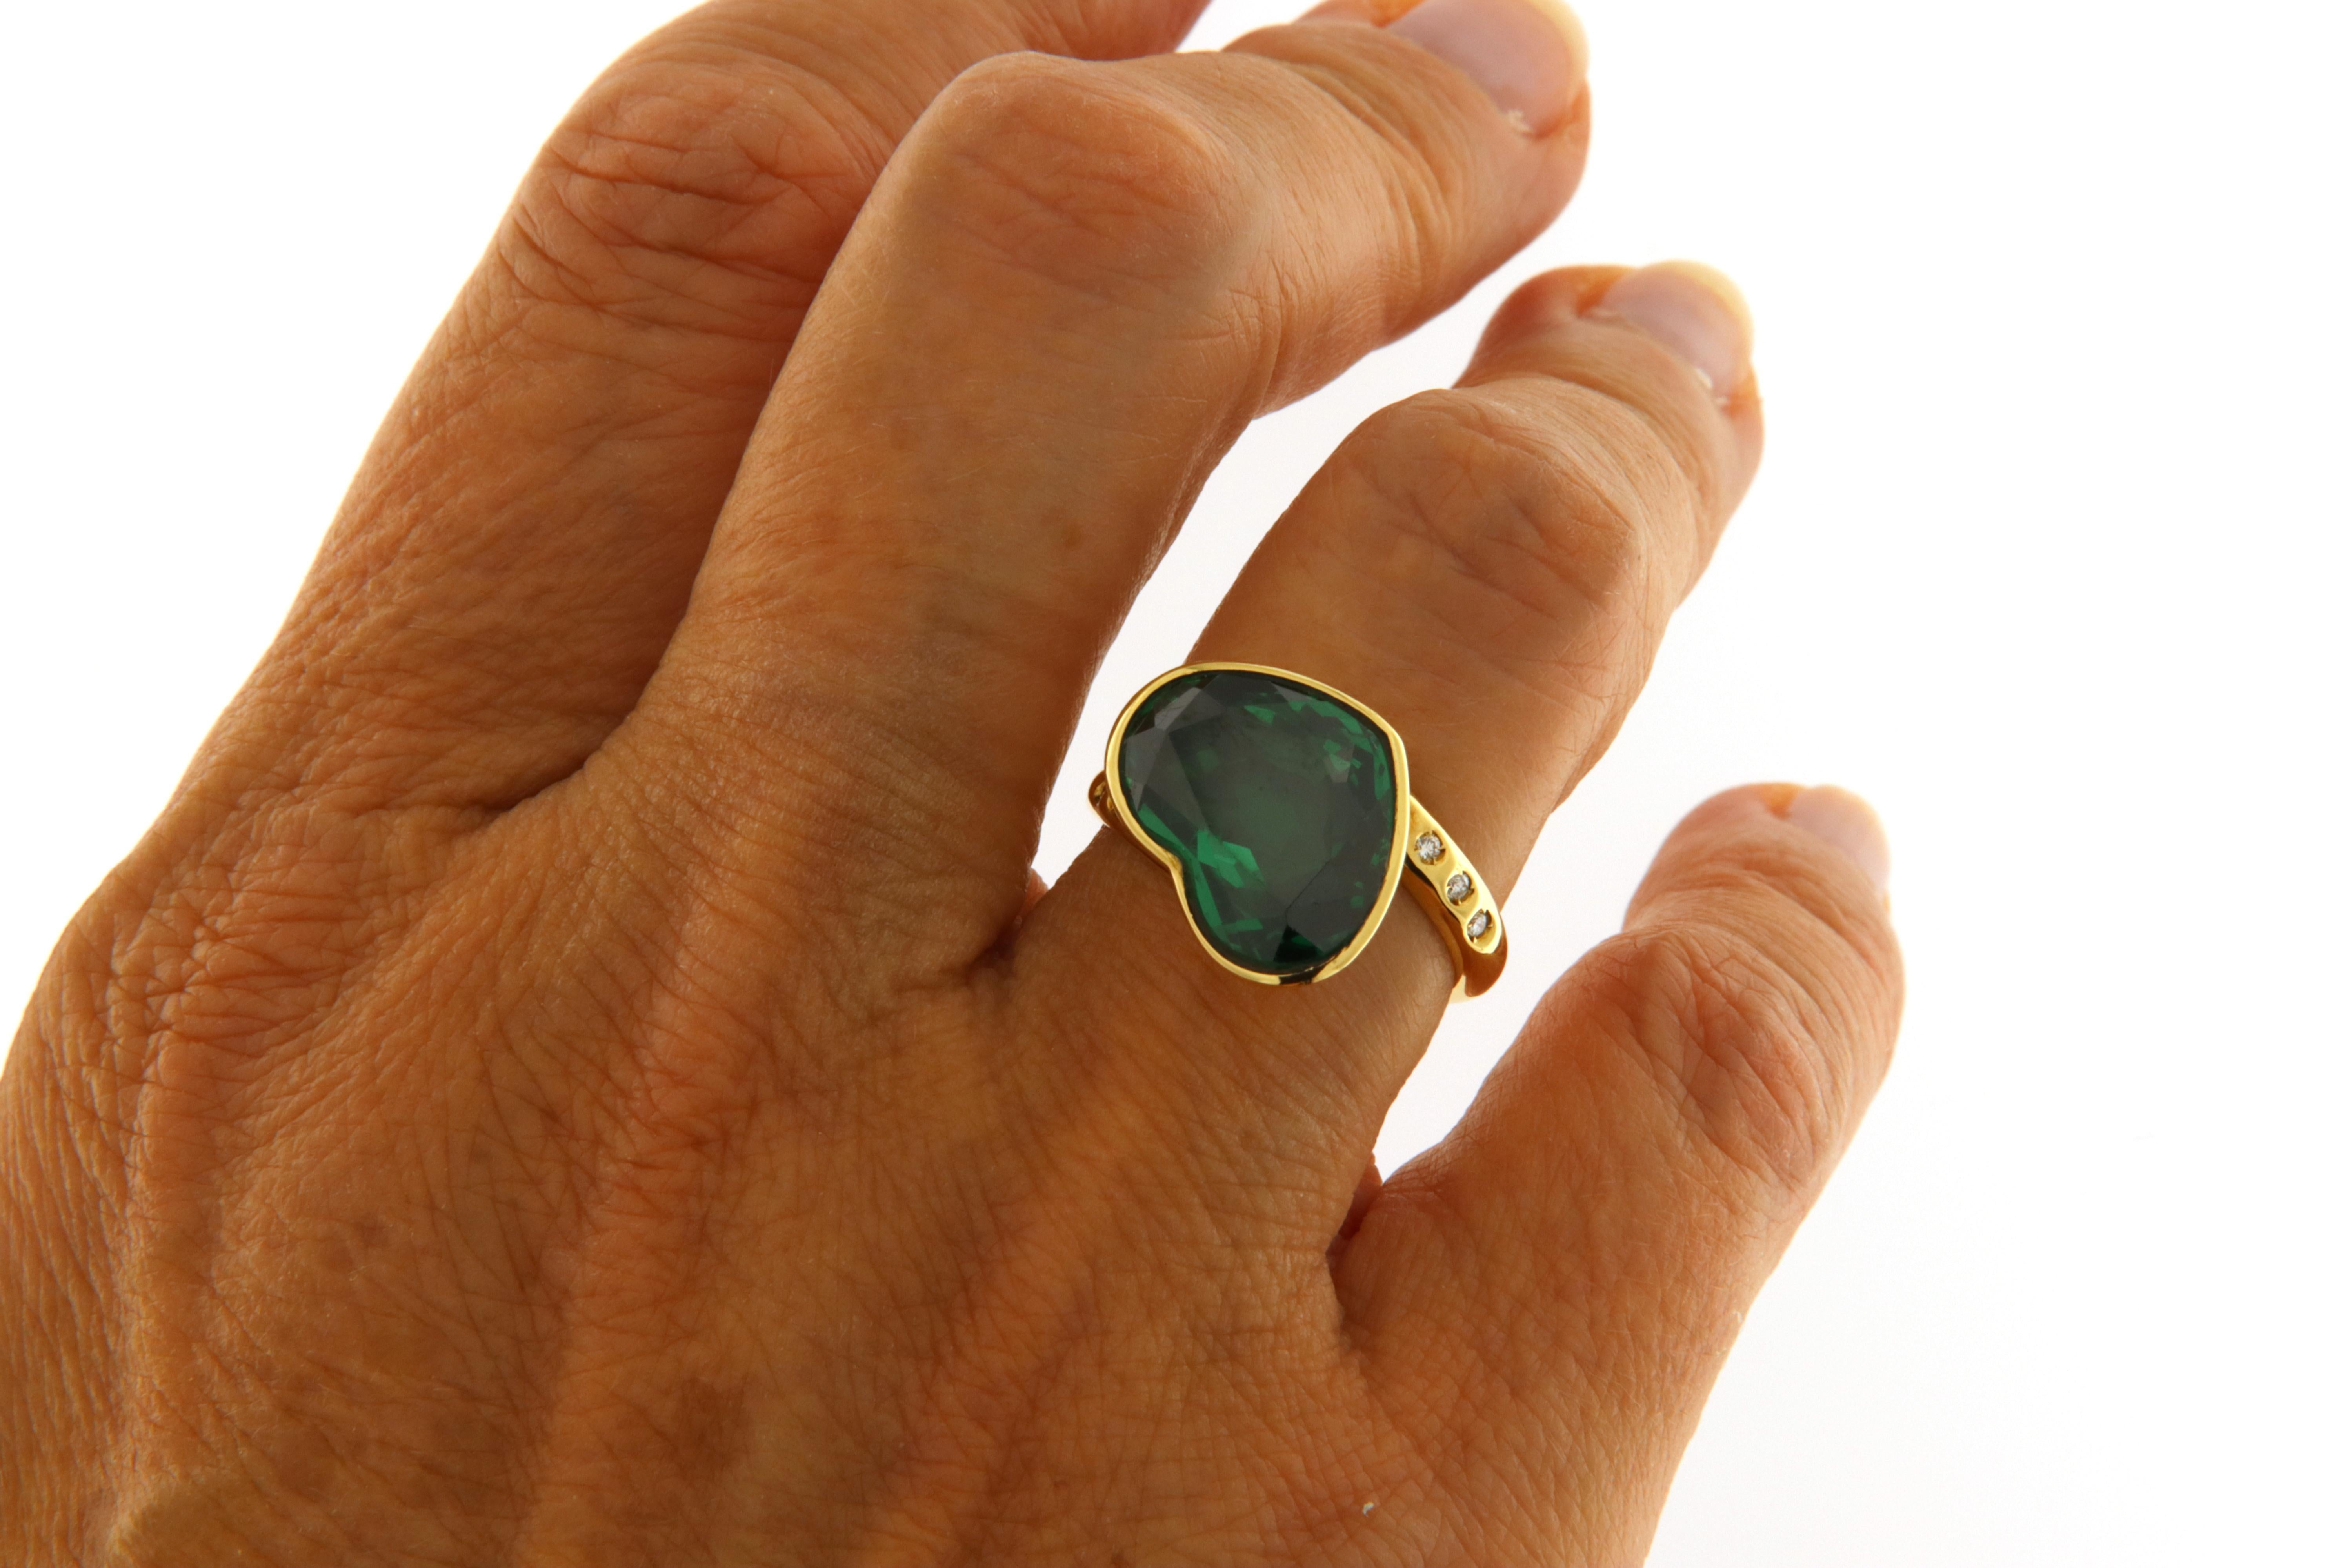 18 Kt Yellow Gold Ring with Diamonds and a Green Tourmaline Heart For Sale 3